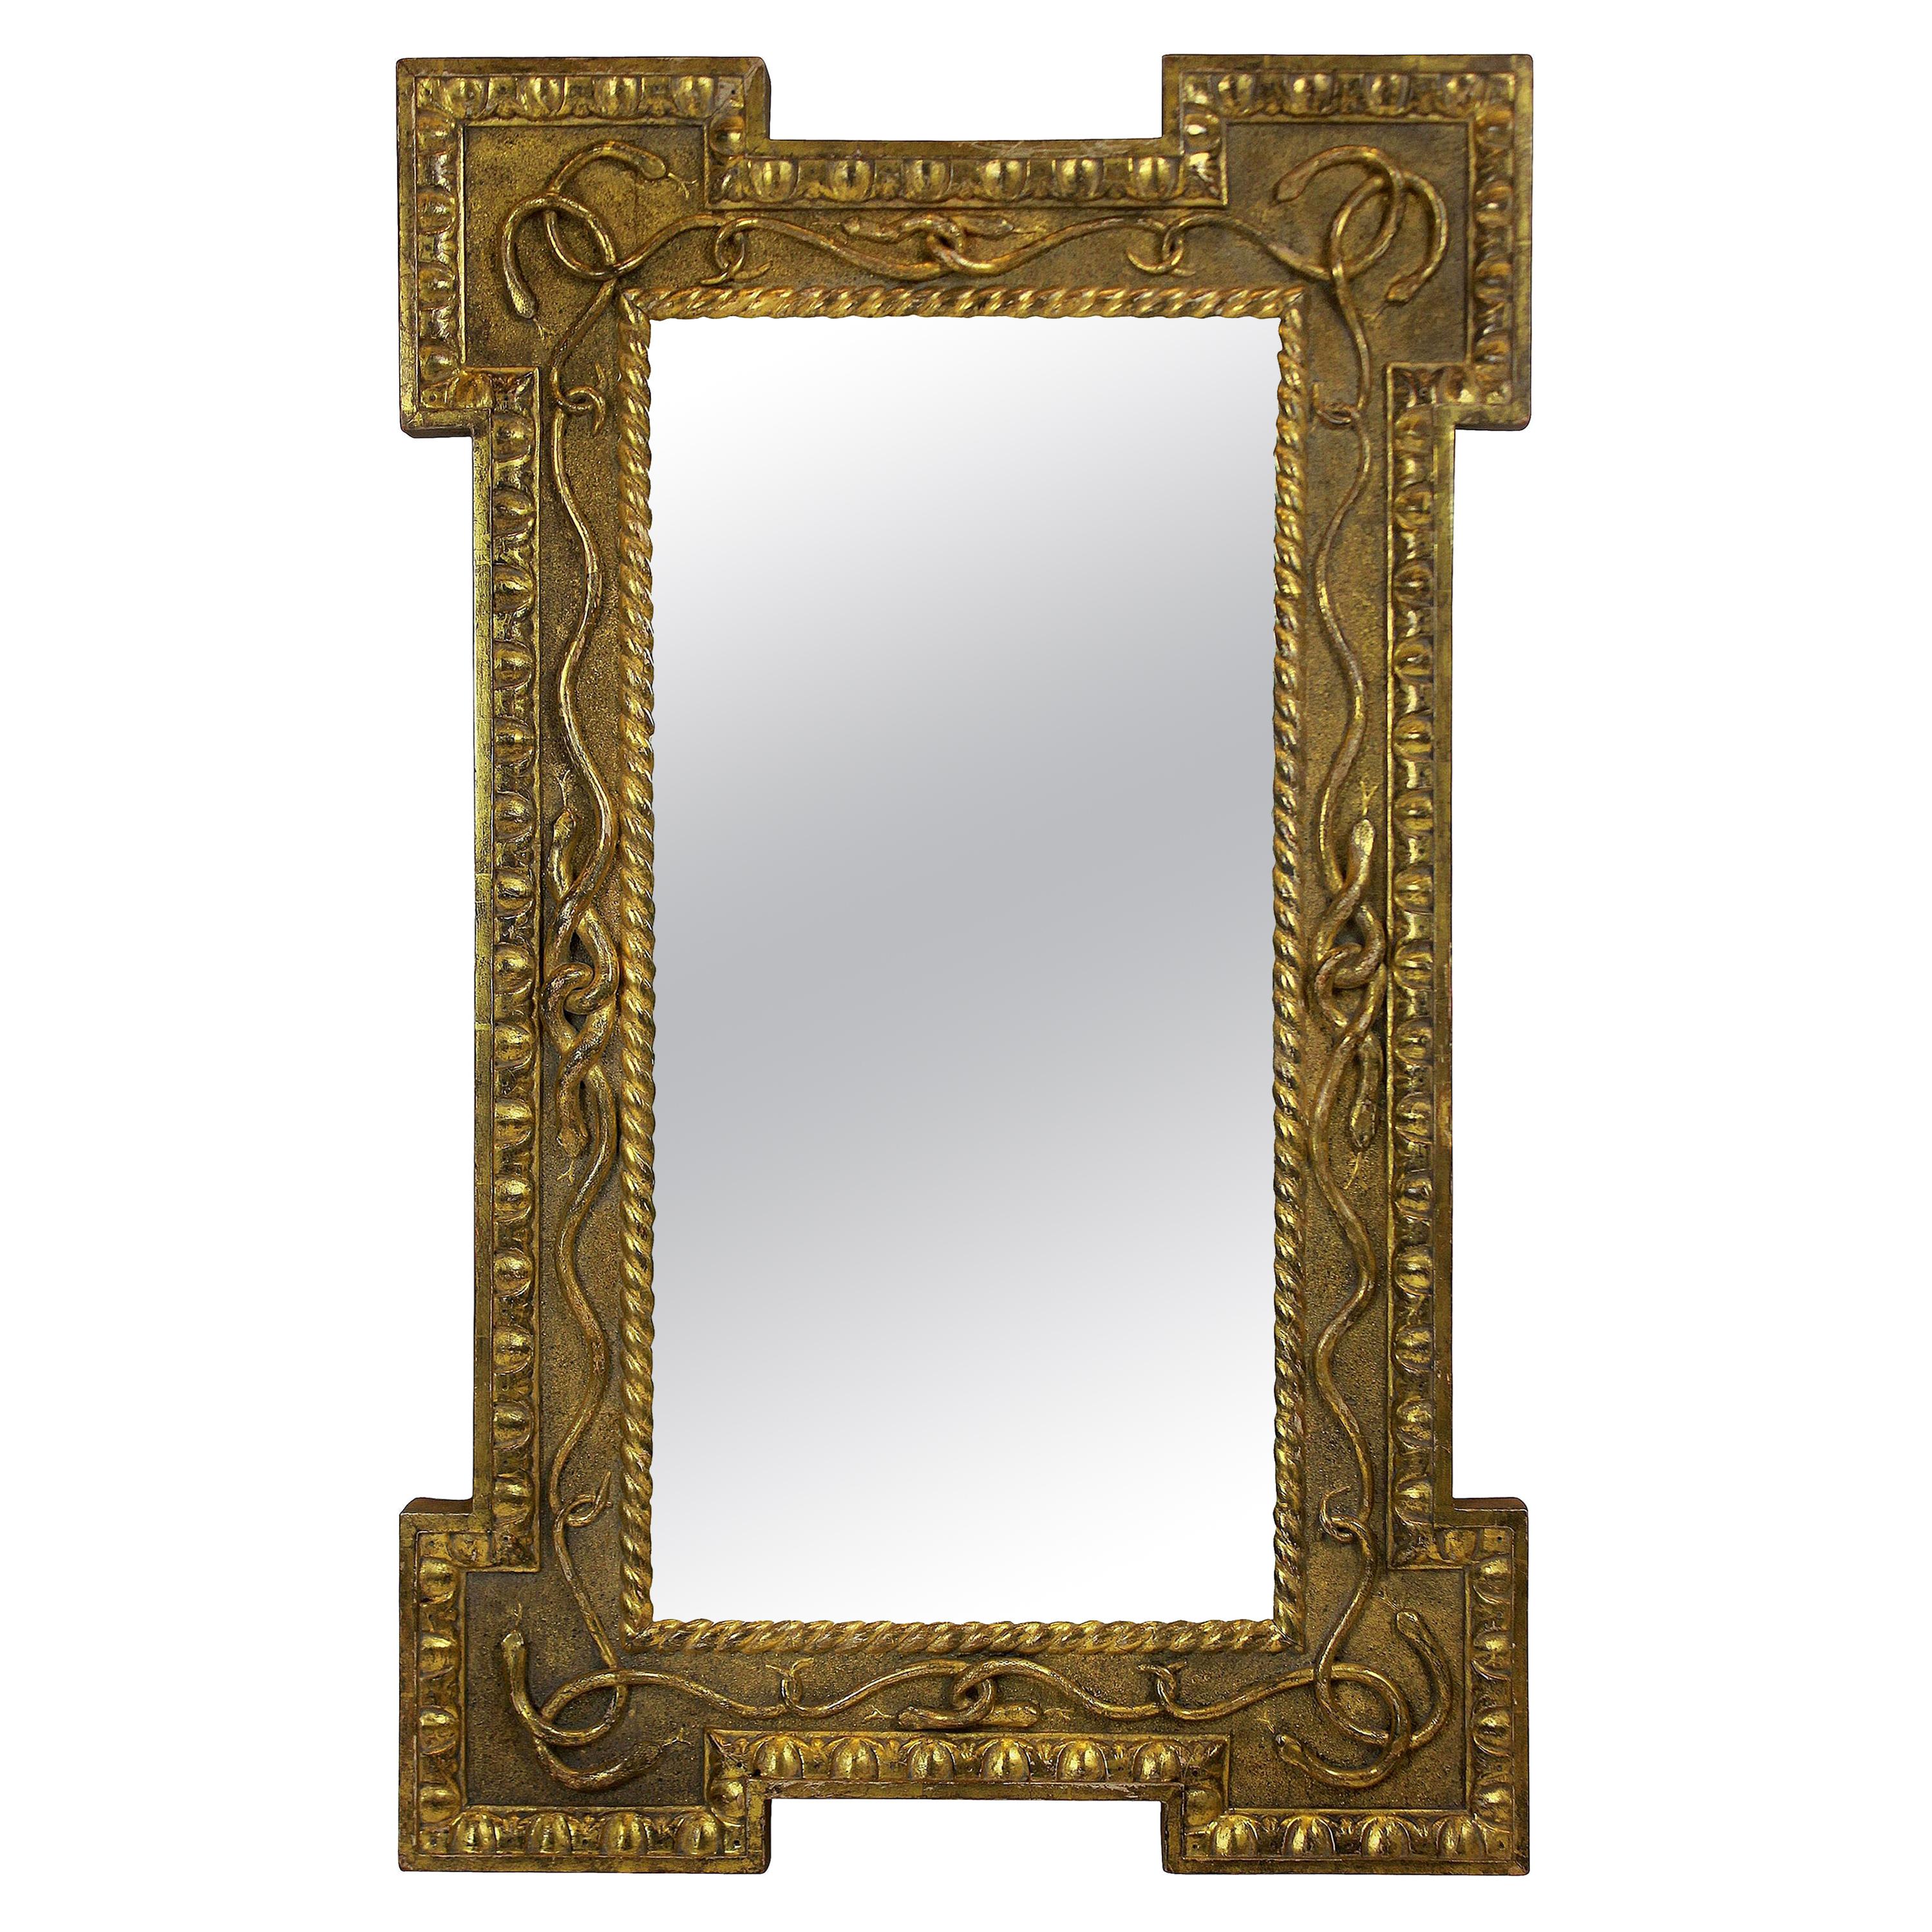 Regency Giltwood Mirror with Serpent Decoration